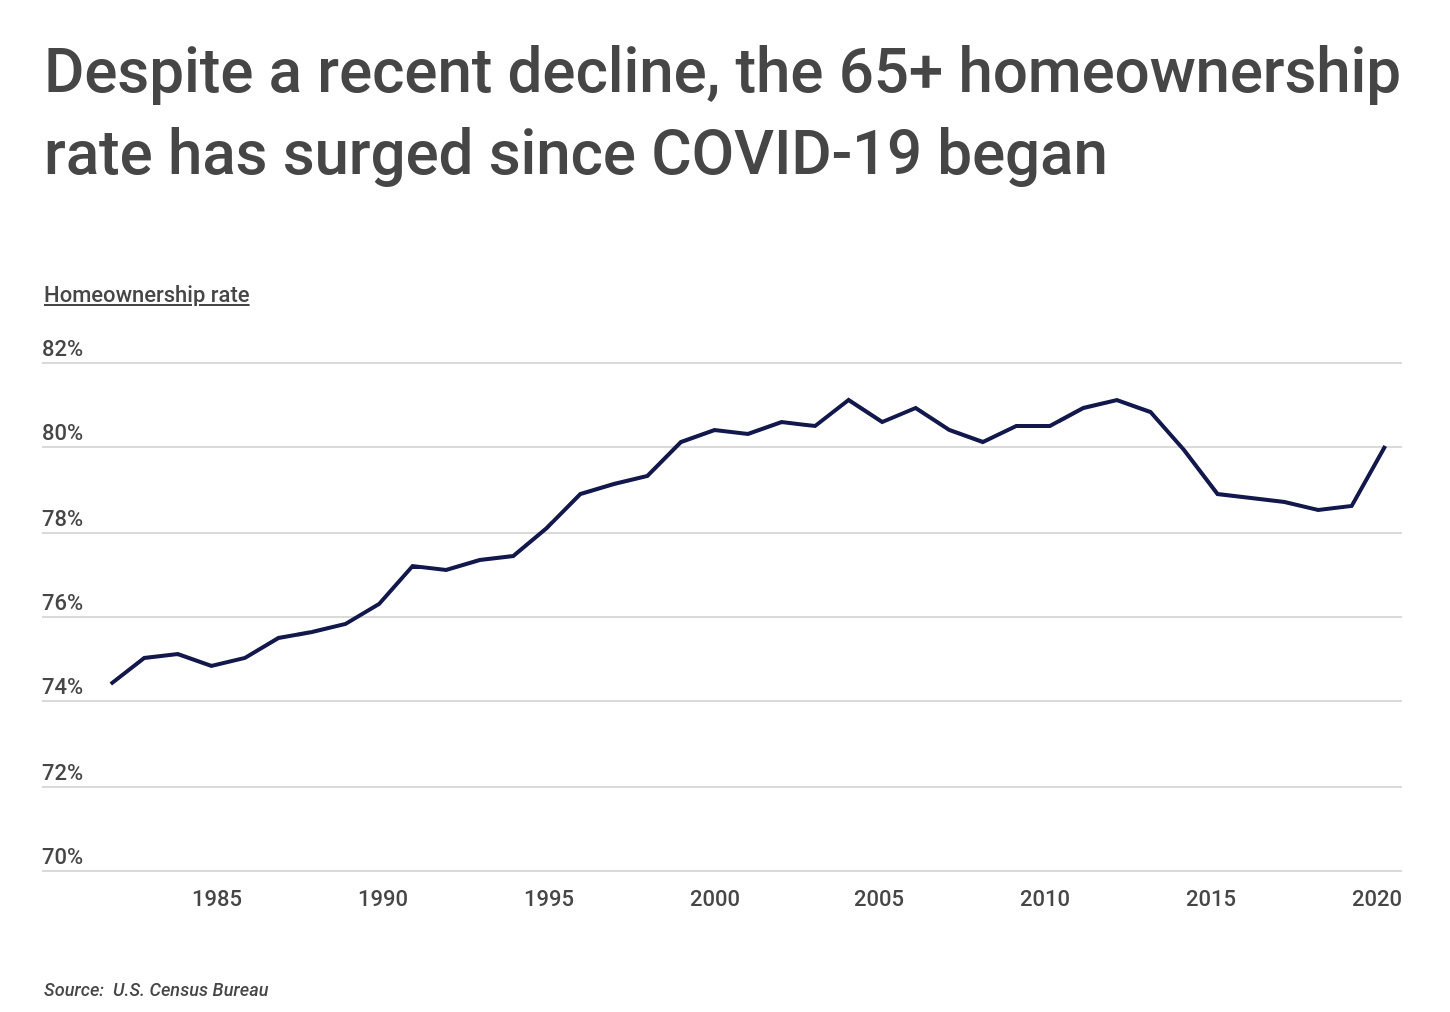 Chart1_The 65+ homeownership rate has surged since COVID started